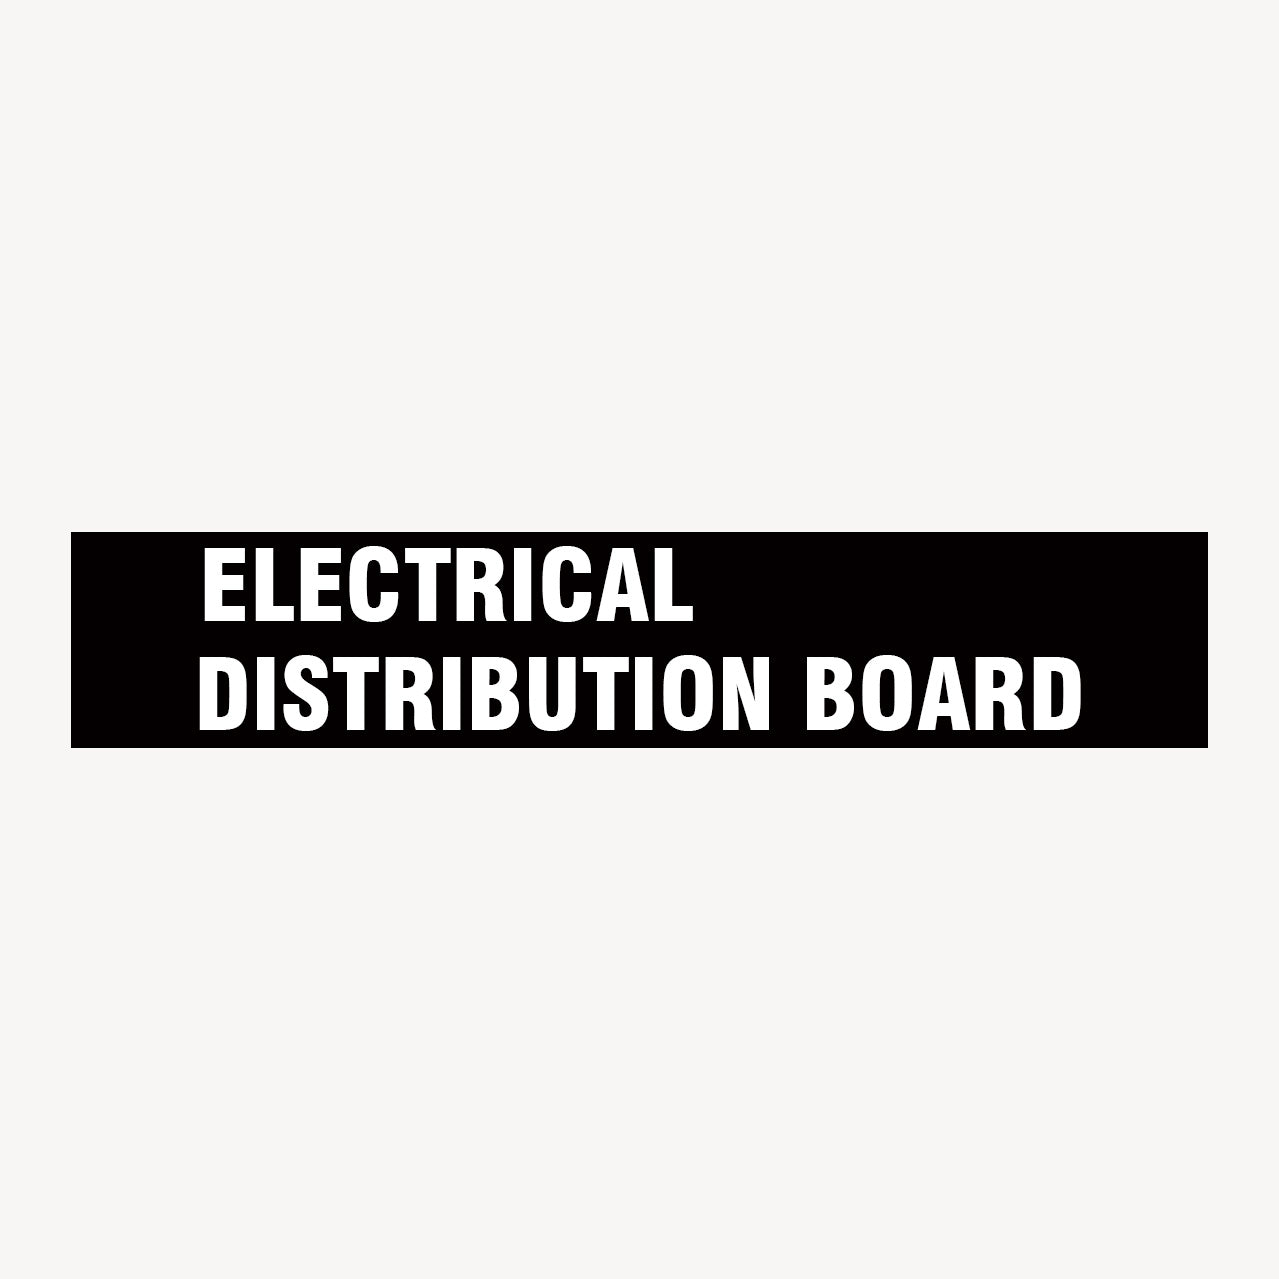 ELECTRICAL DISTRIBUTION BOARD SIGN